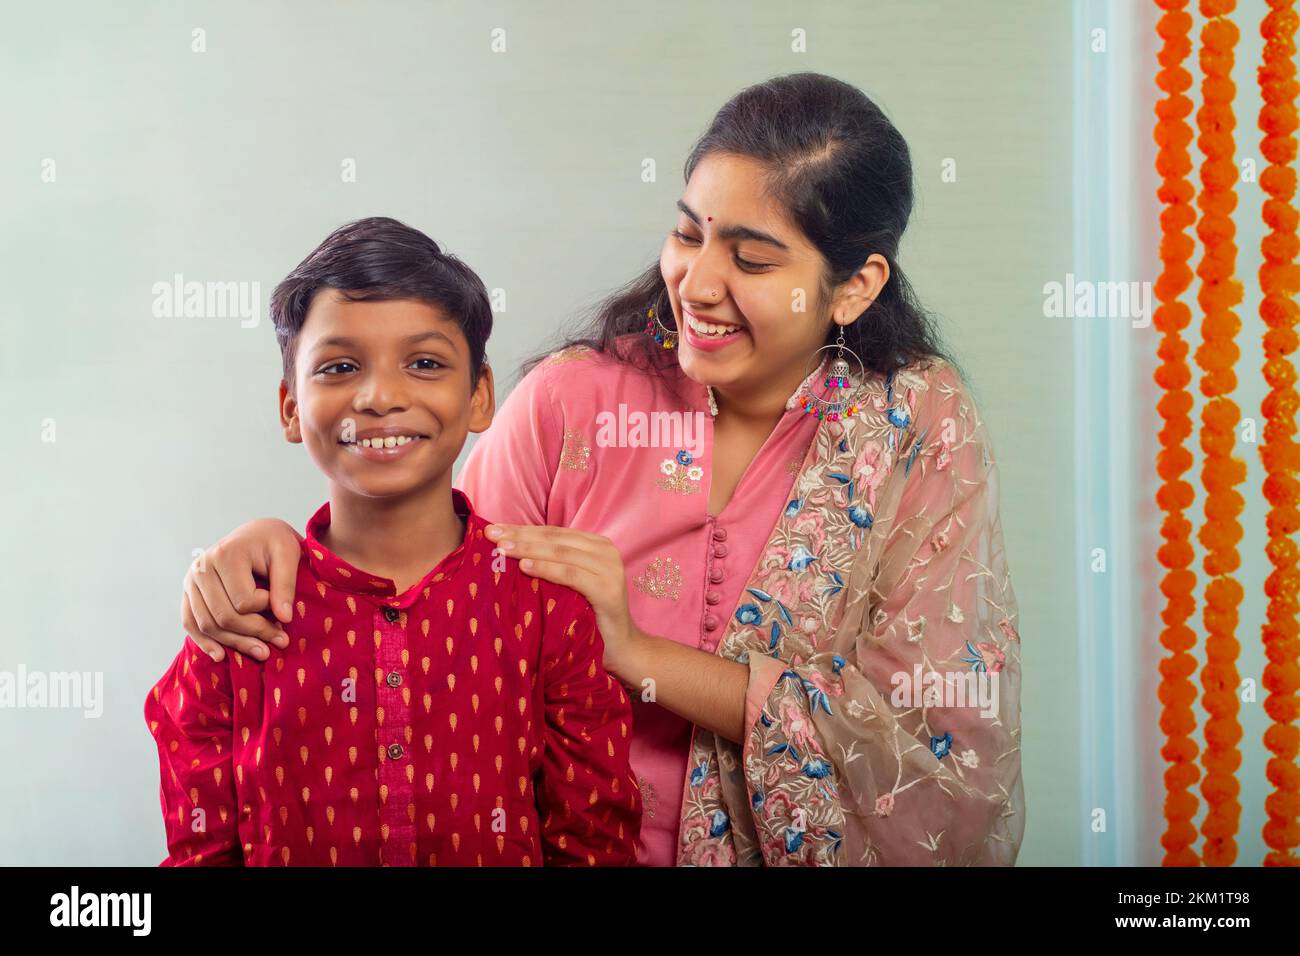 a happy brother and sister wearing a traditional dress and enjoying Stock Photo